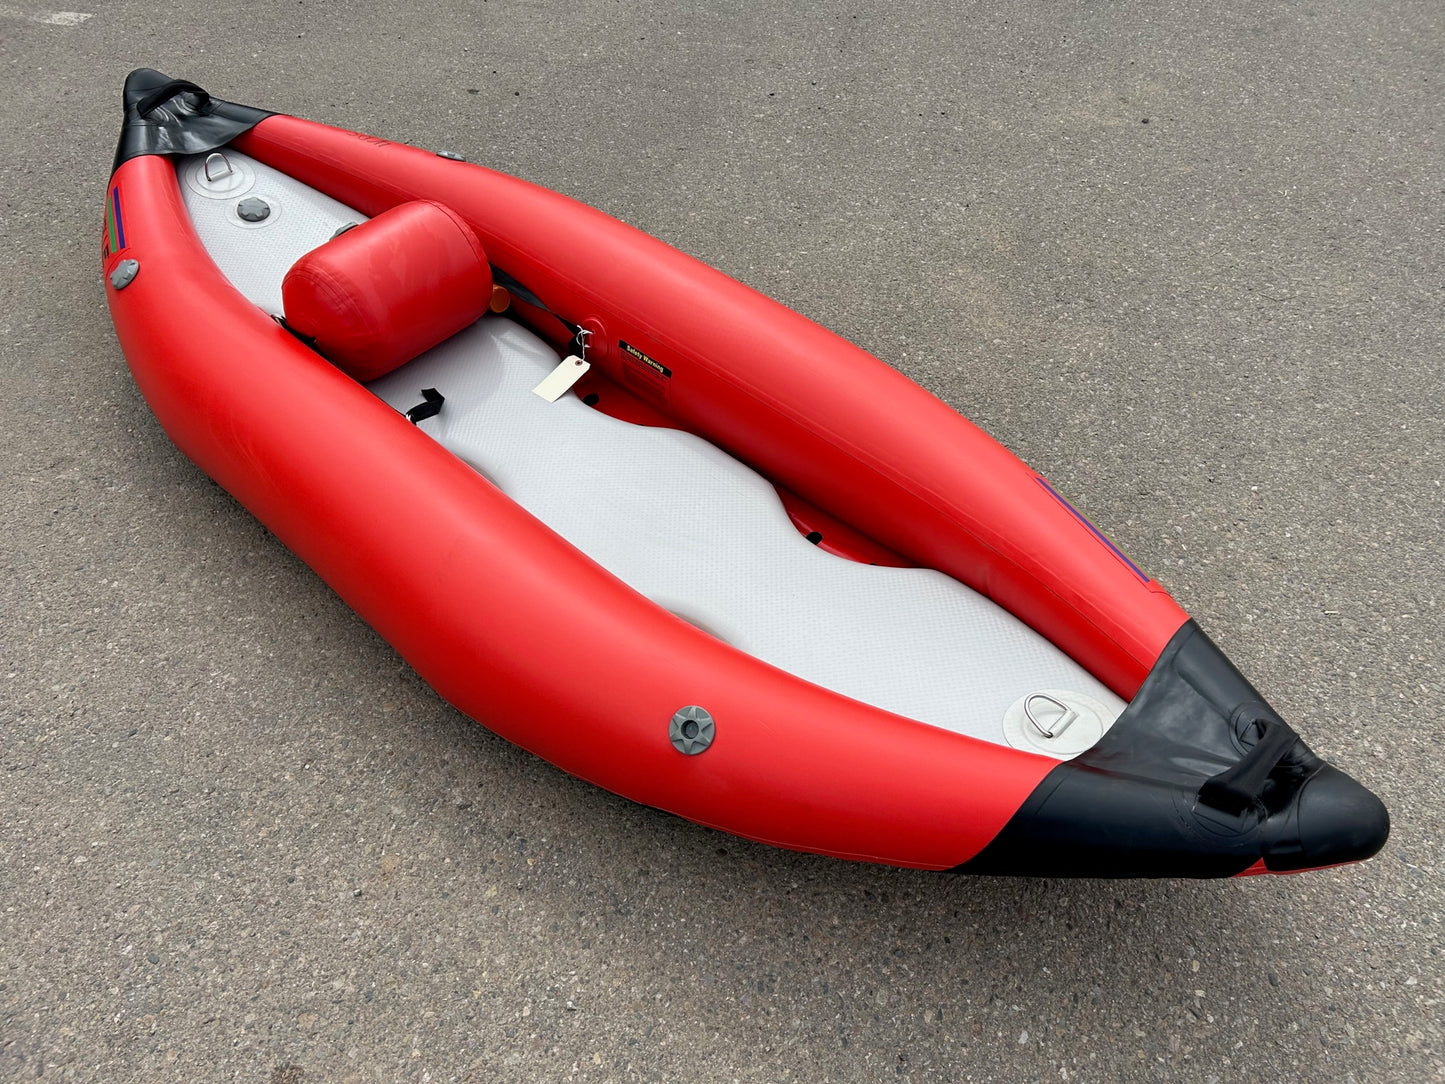 An Valle Truckee Ducky Solo inflatable kayak in red and black color, with a drop stitch floor, resting on the ground.